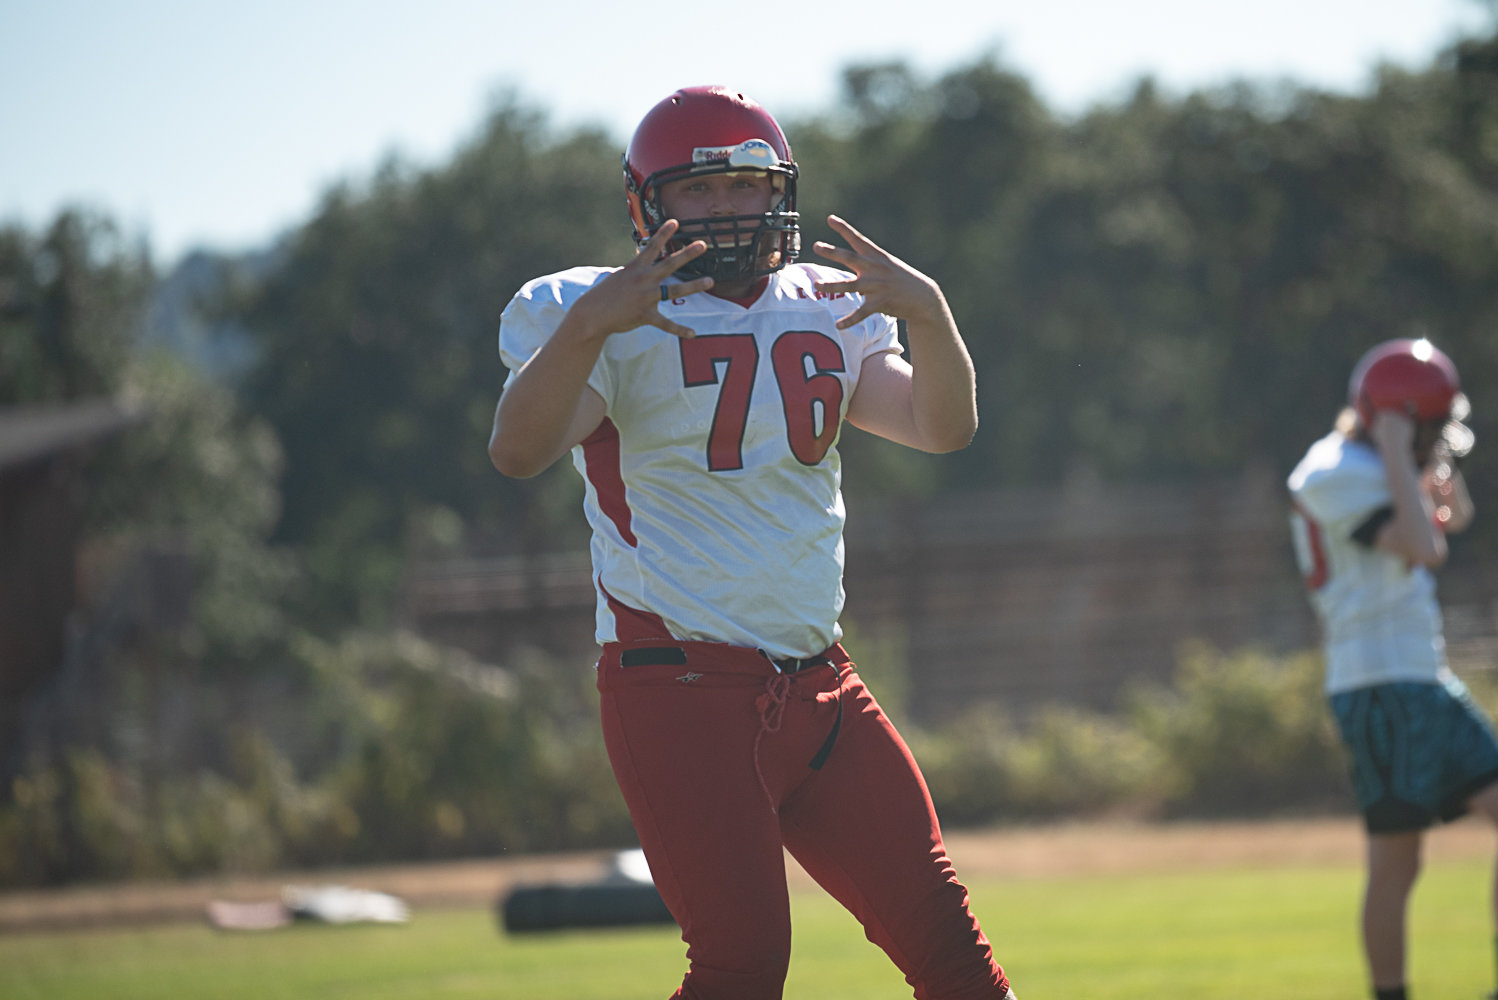 An Oakville player poses for a photo during practice Aug. 23.